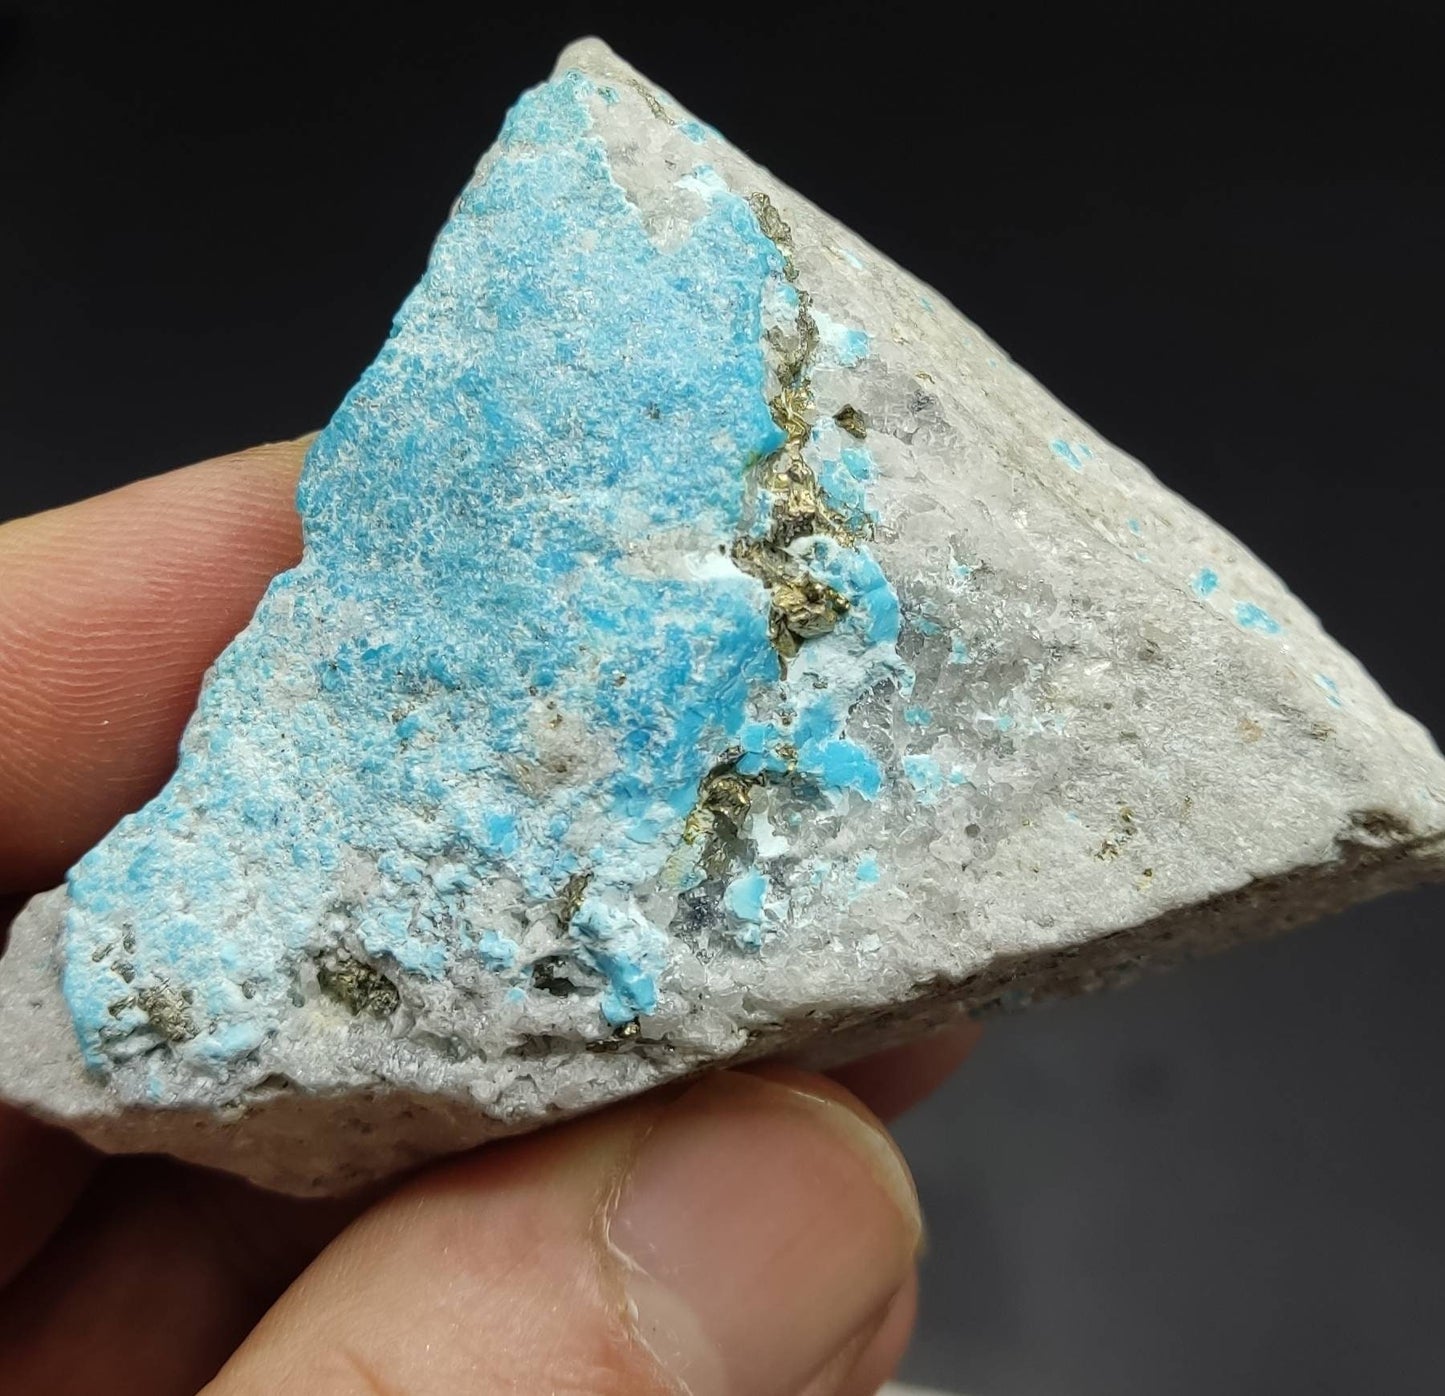 An aesthetic Specimen of natural turquoise in matrix with some pyrite 119 grams